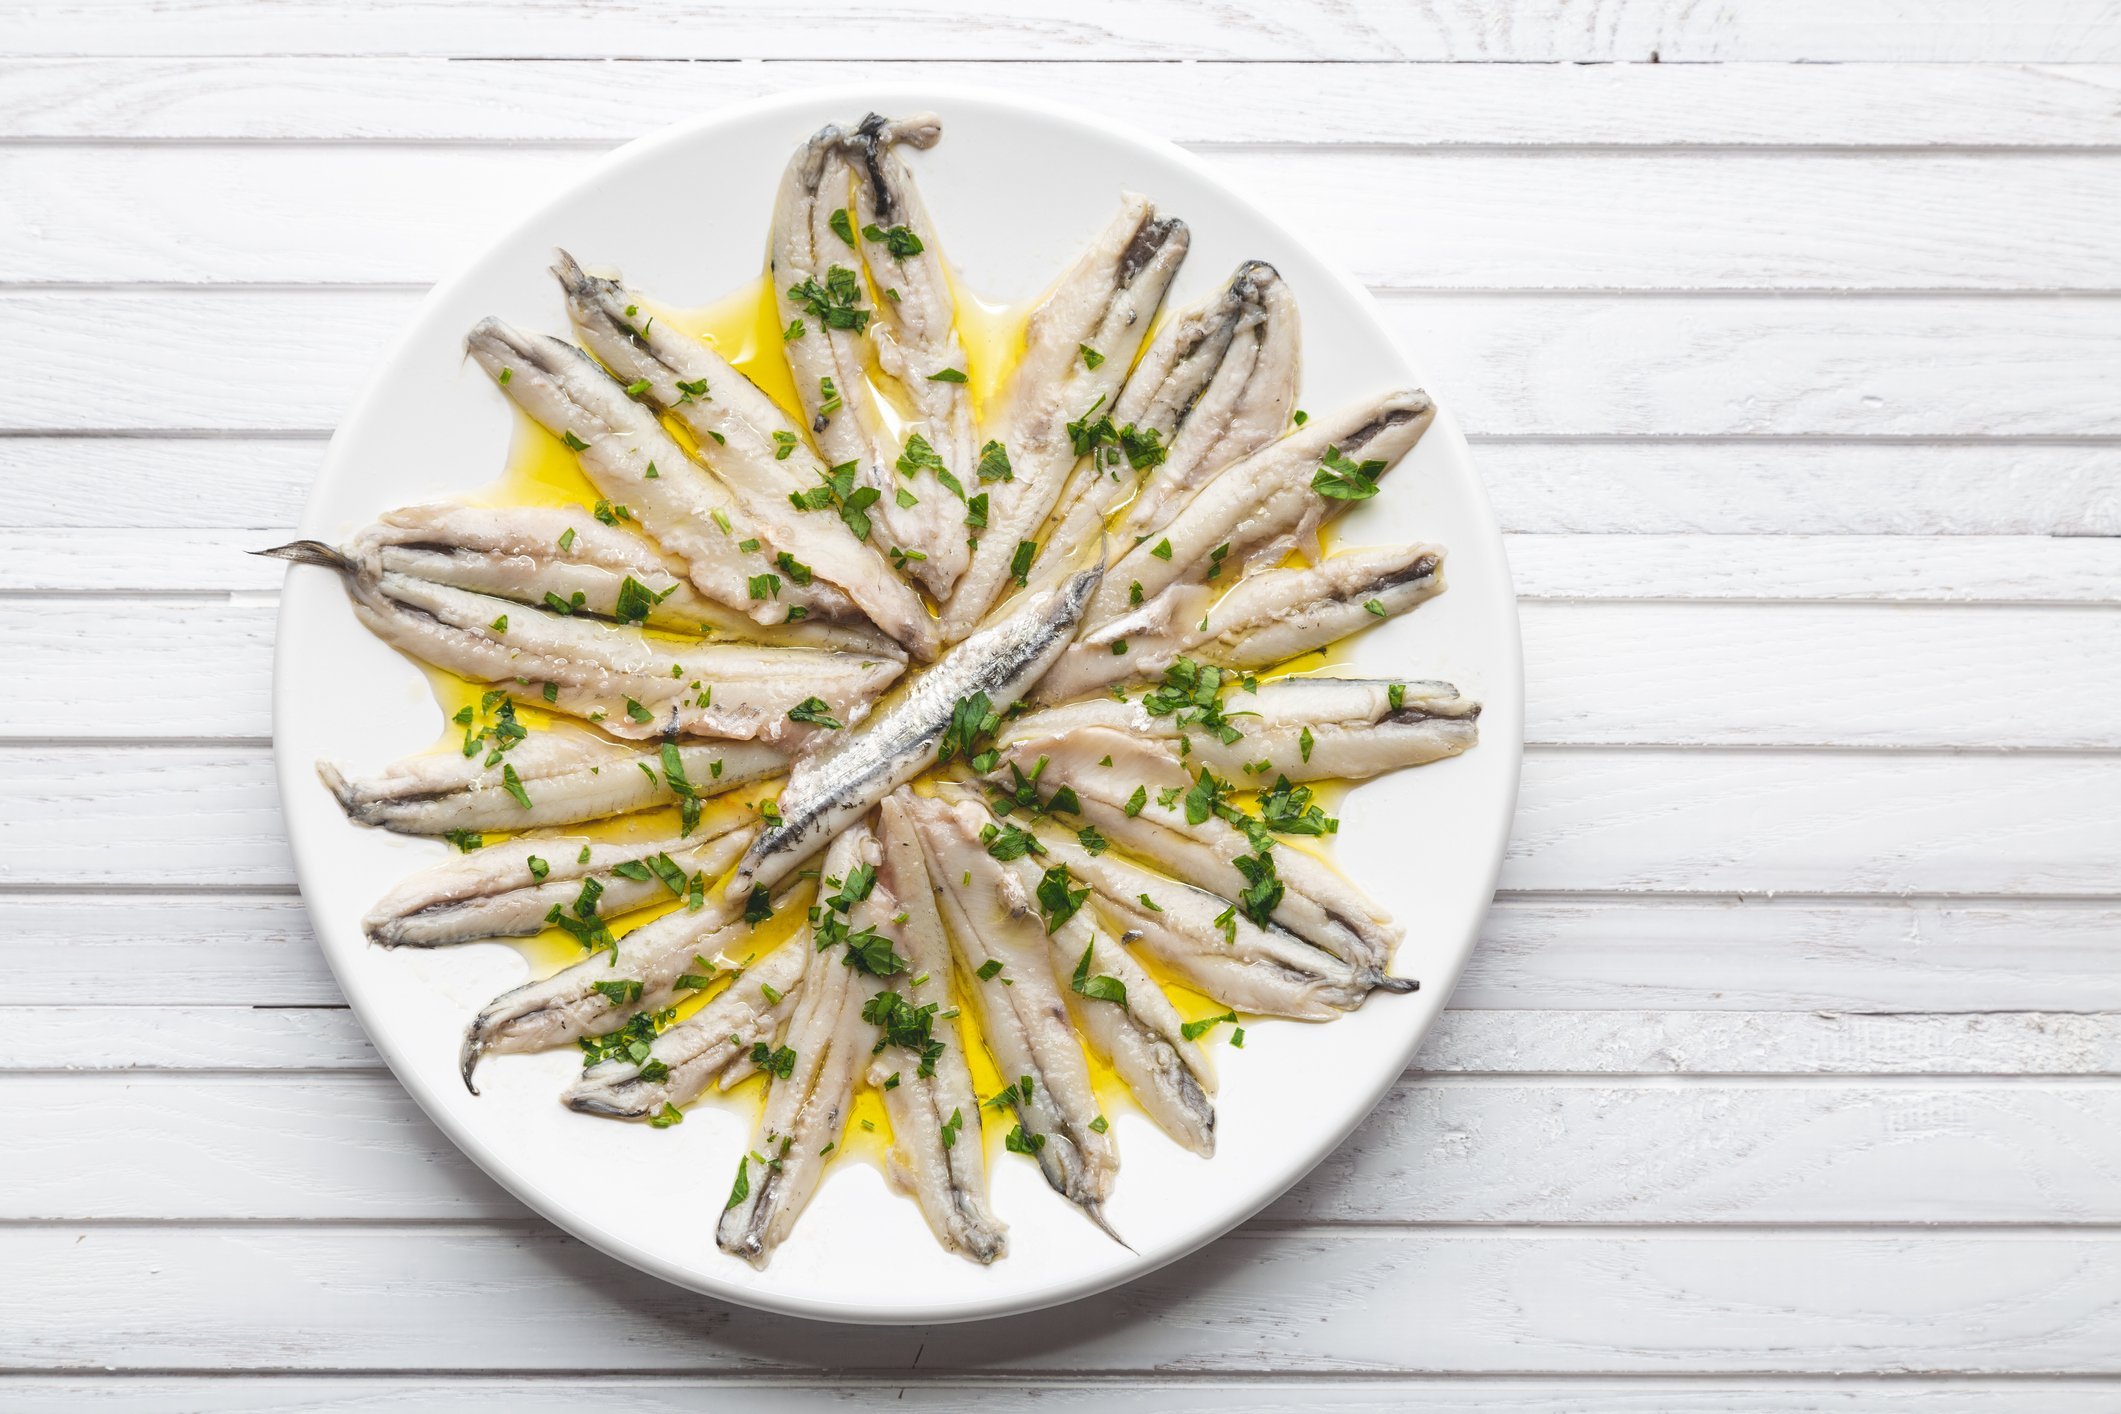 Instead of red meat, try eating some anchovies from the Black Sea region from time to time. (iStock Photo)